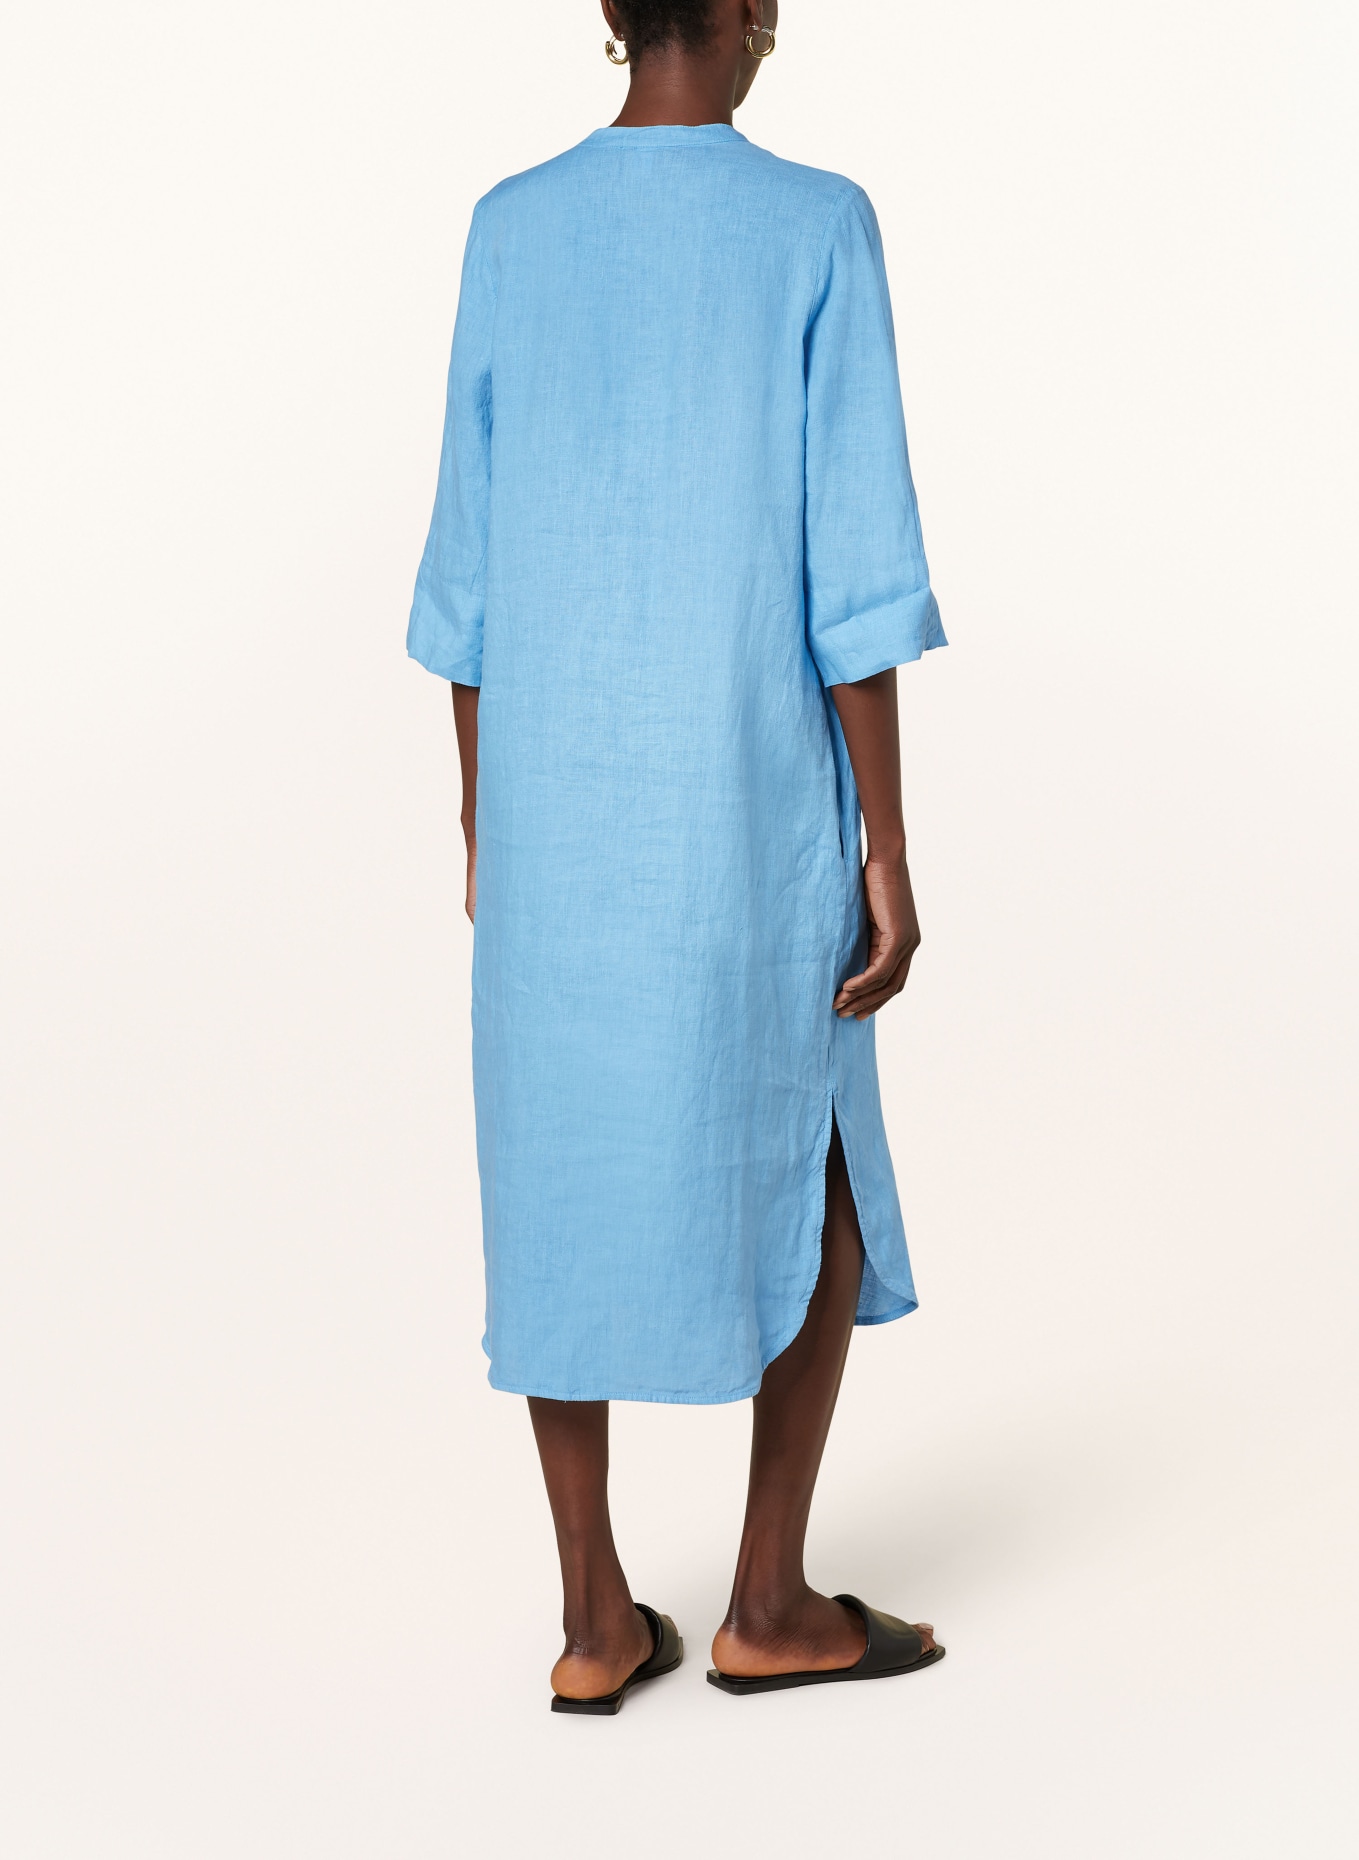 Backstage Linen dress SALLY with 3/4 sleeves, Color: BLUE (Image 3)